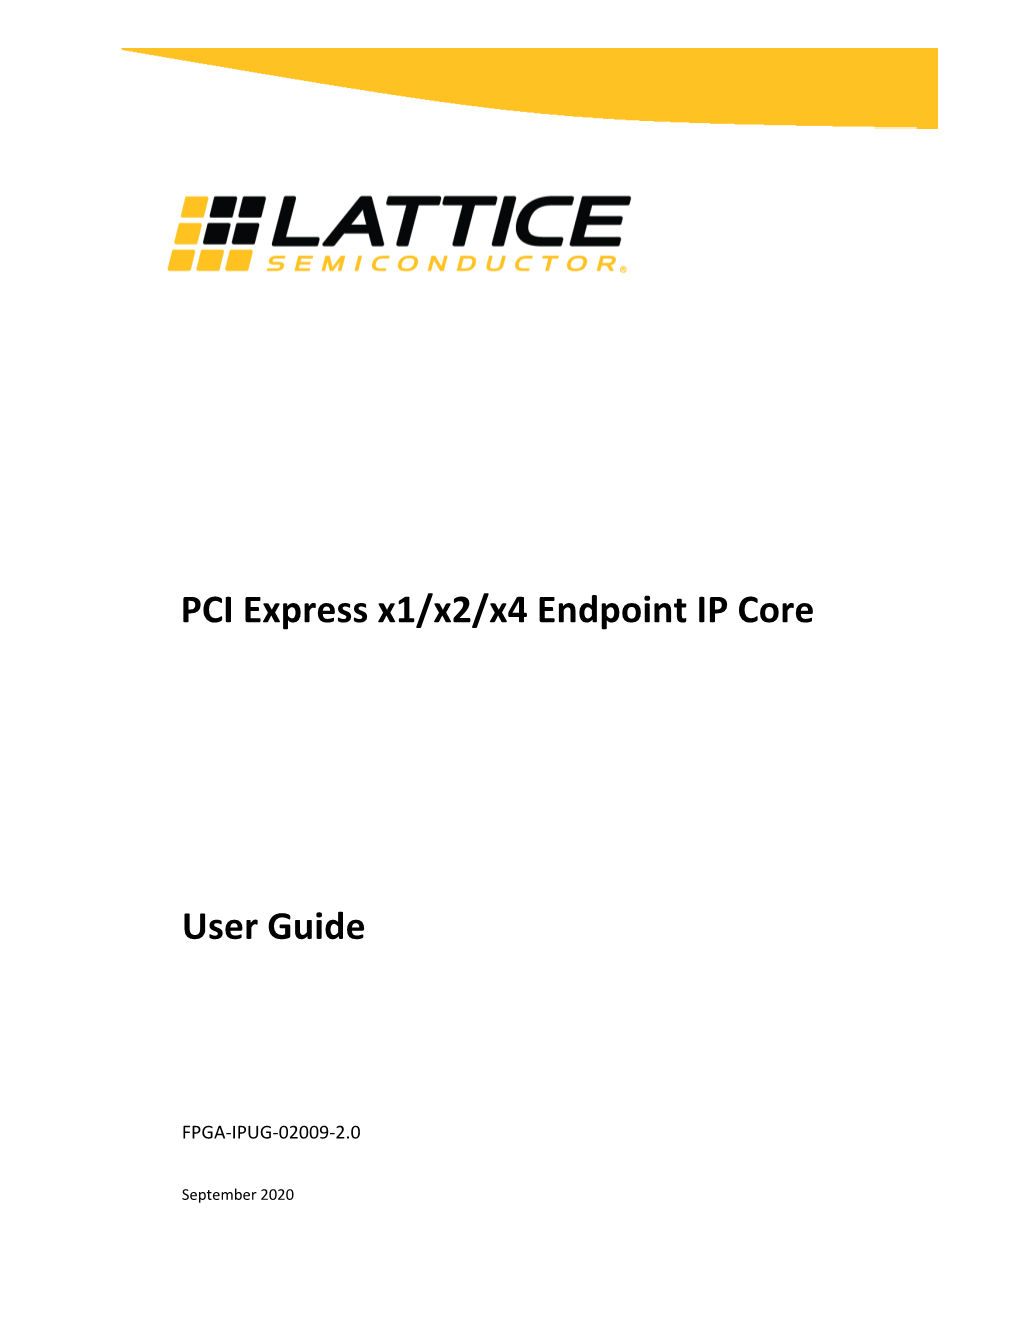 PCI Express X1/X2/X4 Endpoint IP Core User Guide